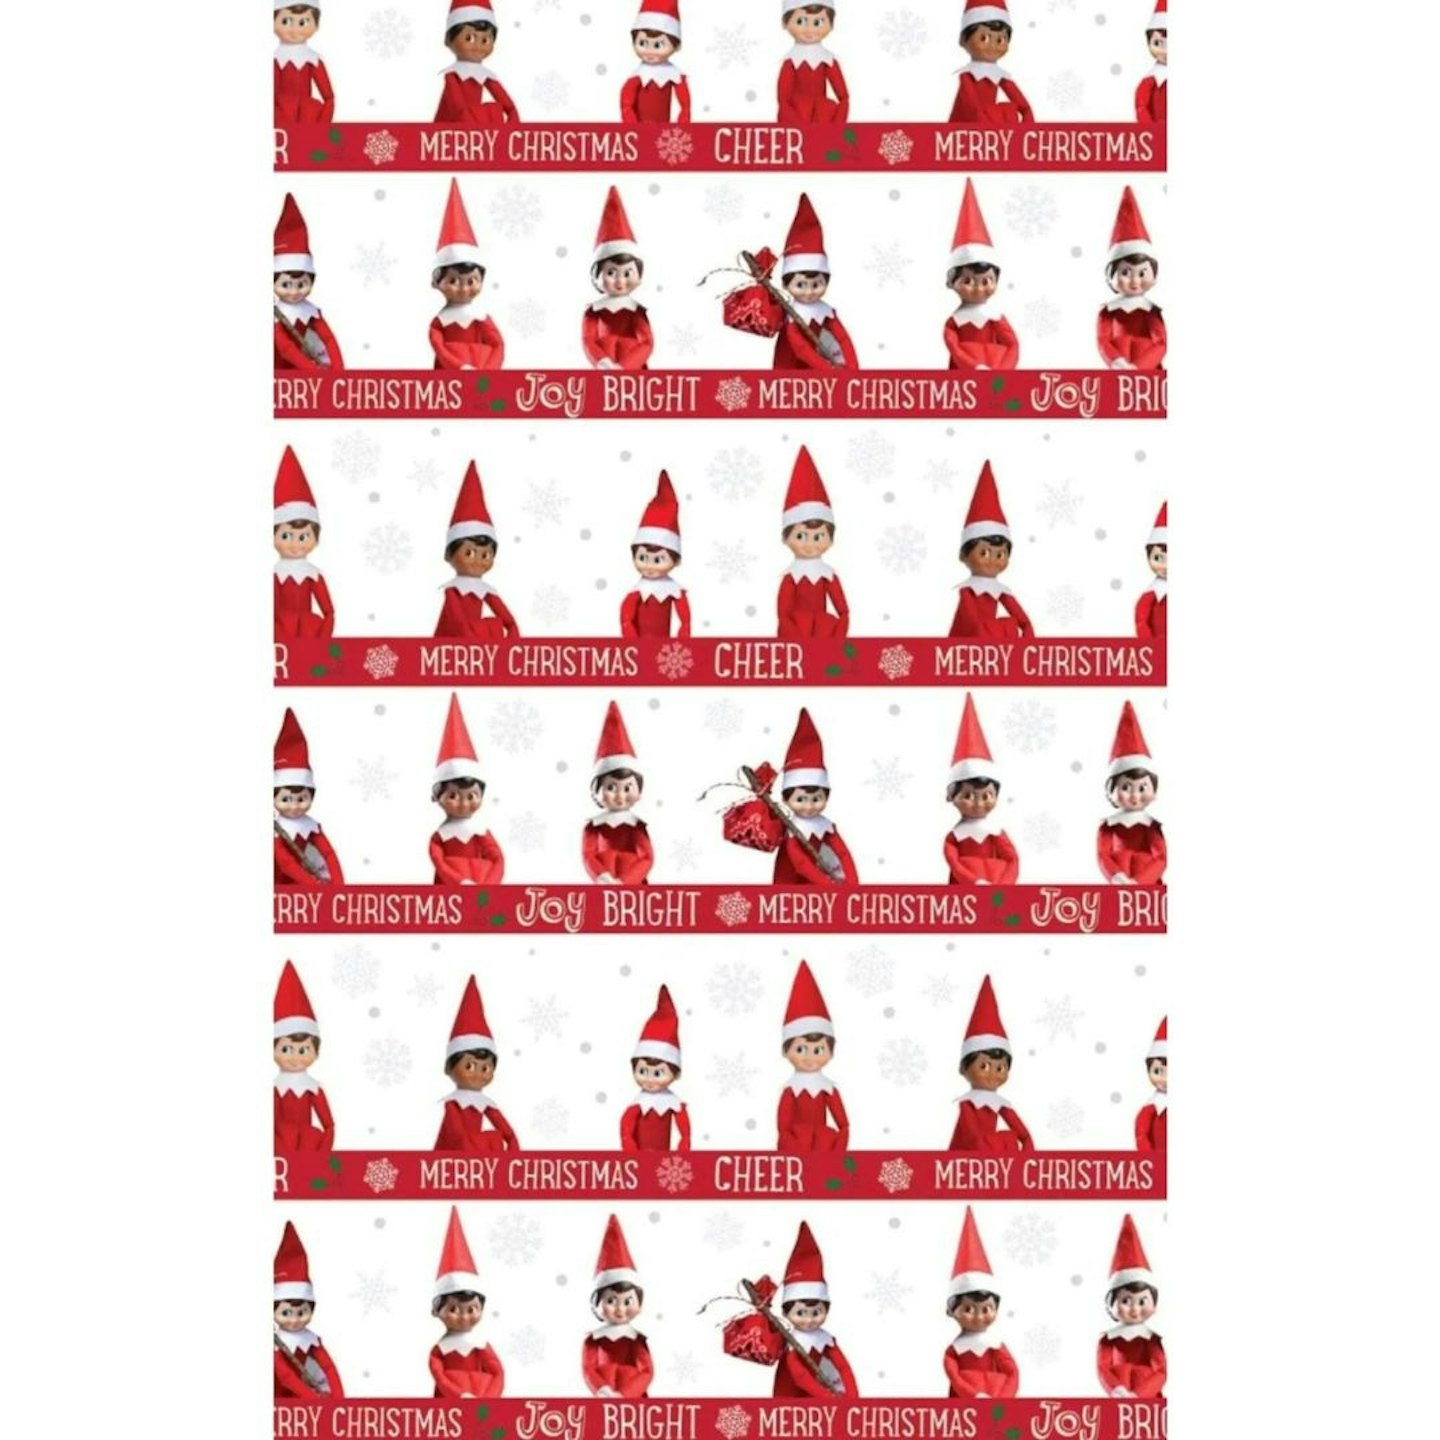 Best Elf on the Shelf props Elf on the Shelf Christmas Gift Wrapping Paper